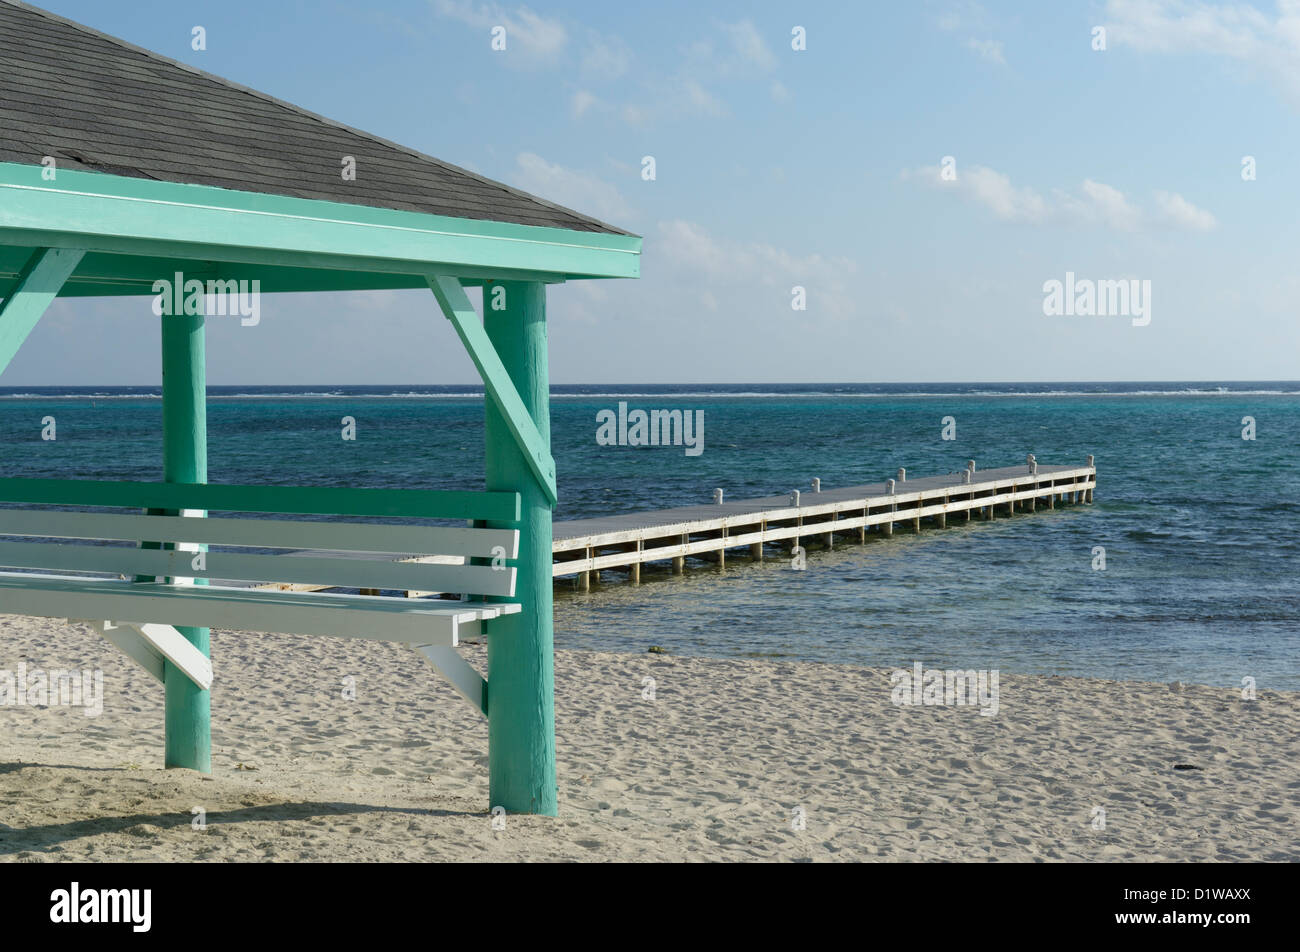 Dock a Colliers spiaggia pubblica, East End, Grand Cayman, Isole Cayman, British West Indies Foto Stock